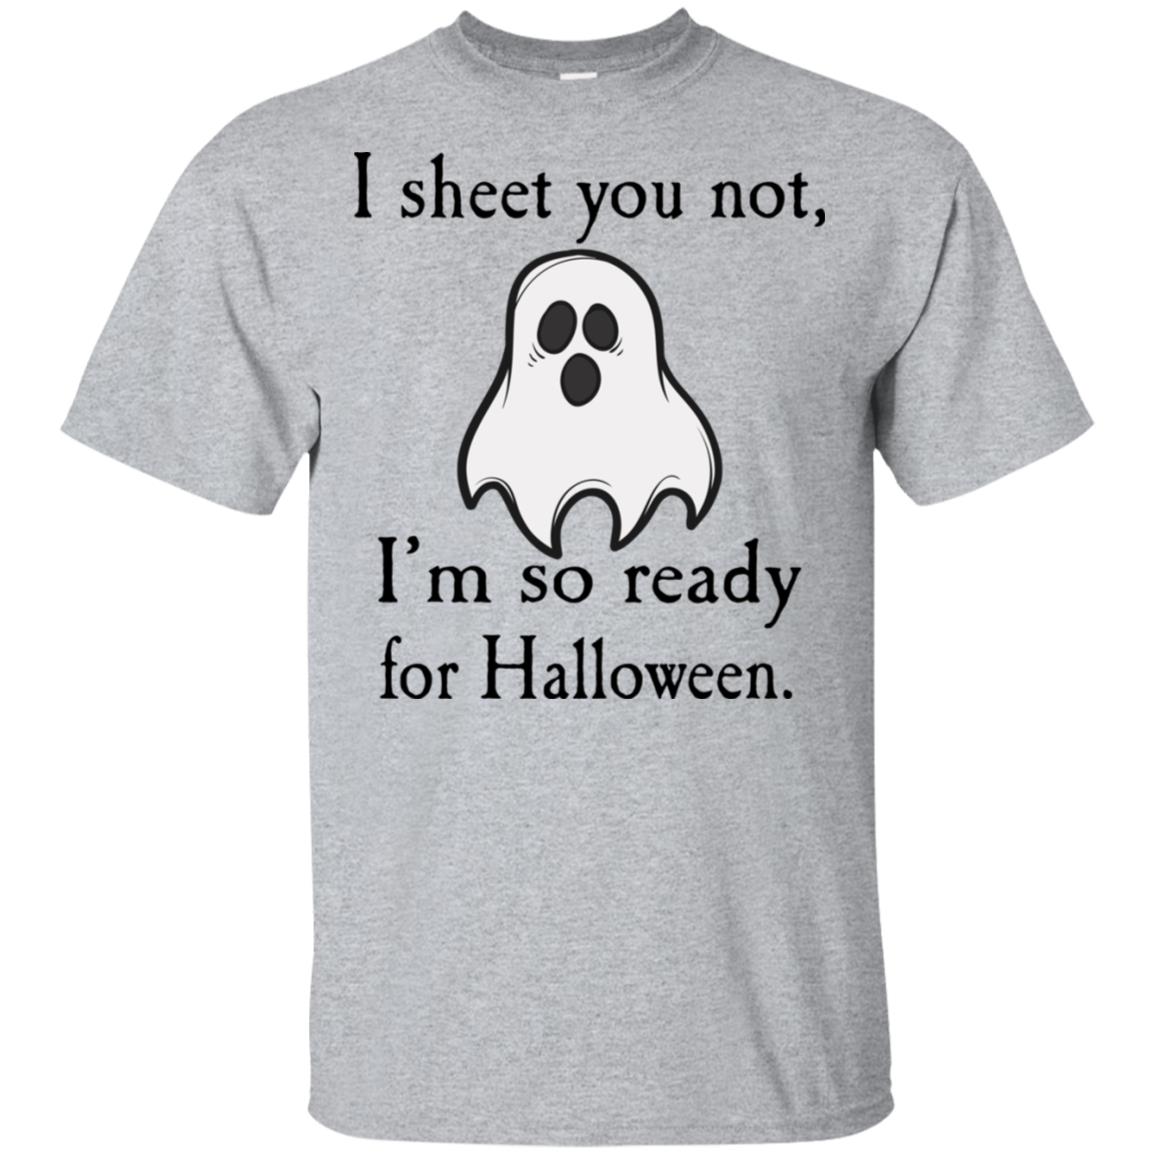 Ghost I sheet you not I’m so ready for Halloween shirt